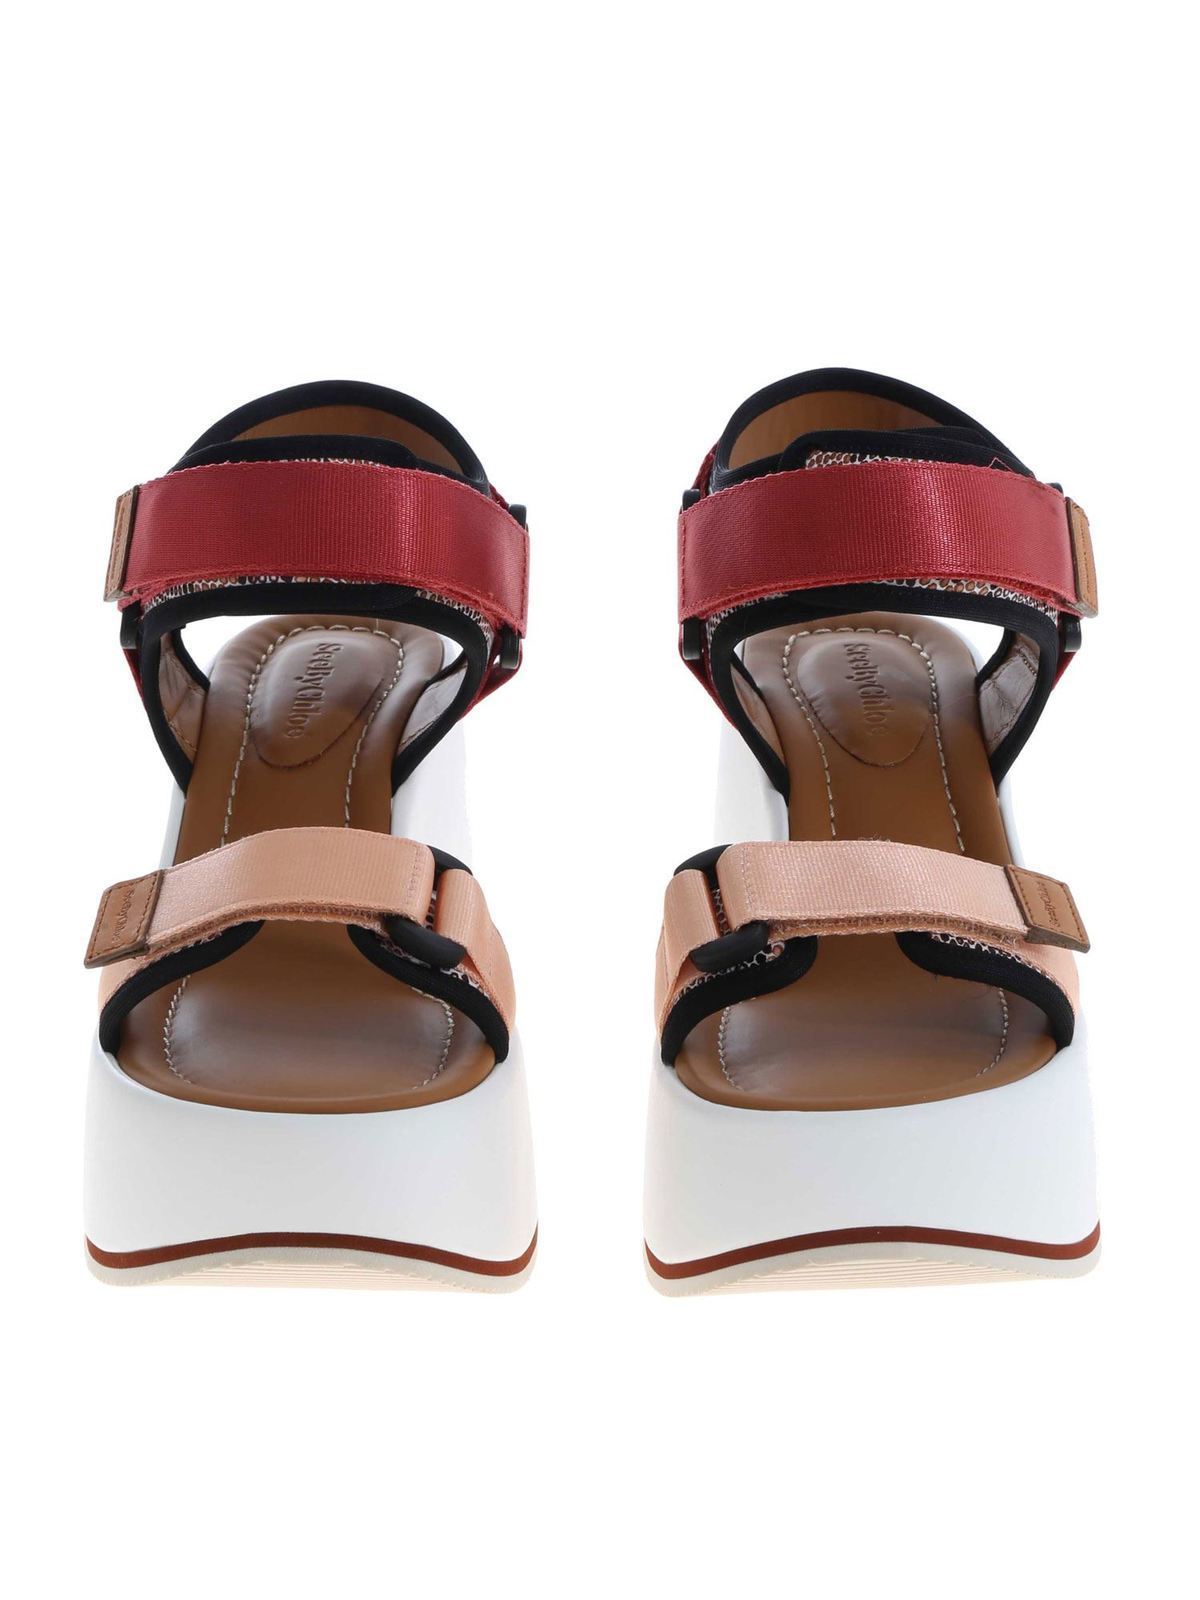 warmte verdamping Caius Sandals See by Chloé - Astana sandals in red and pink - SB34004A504